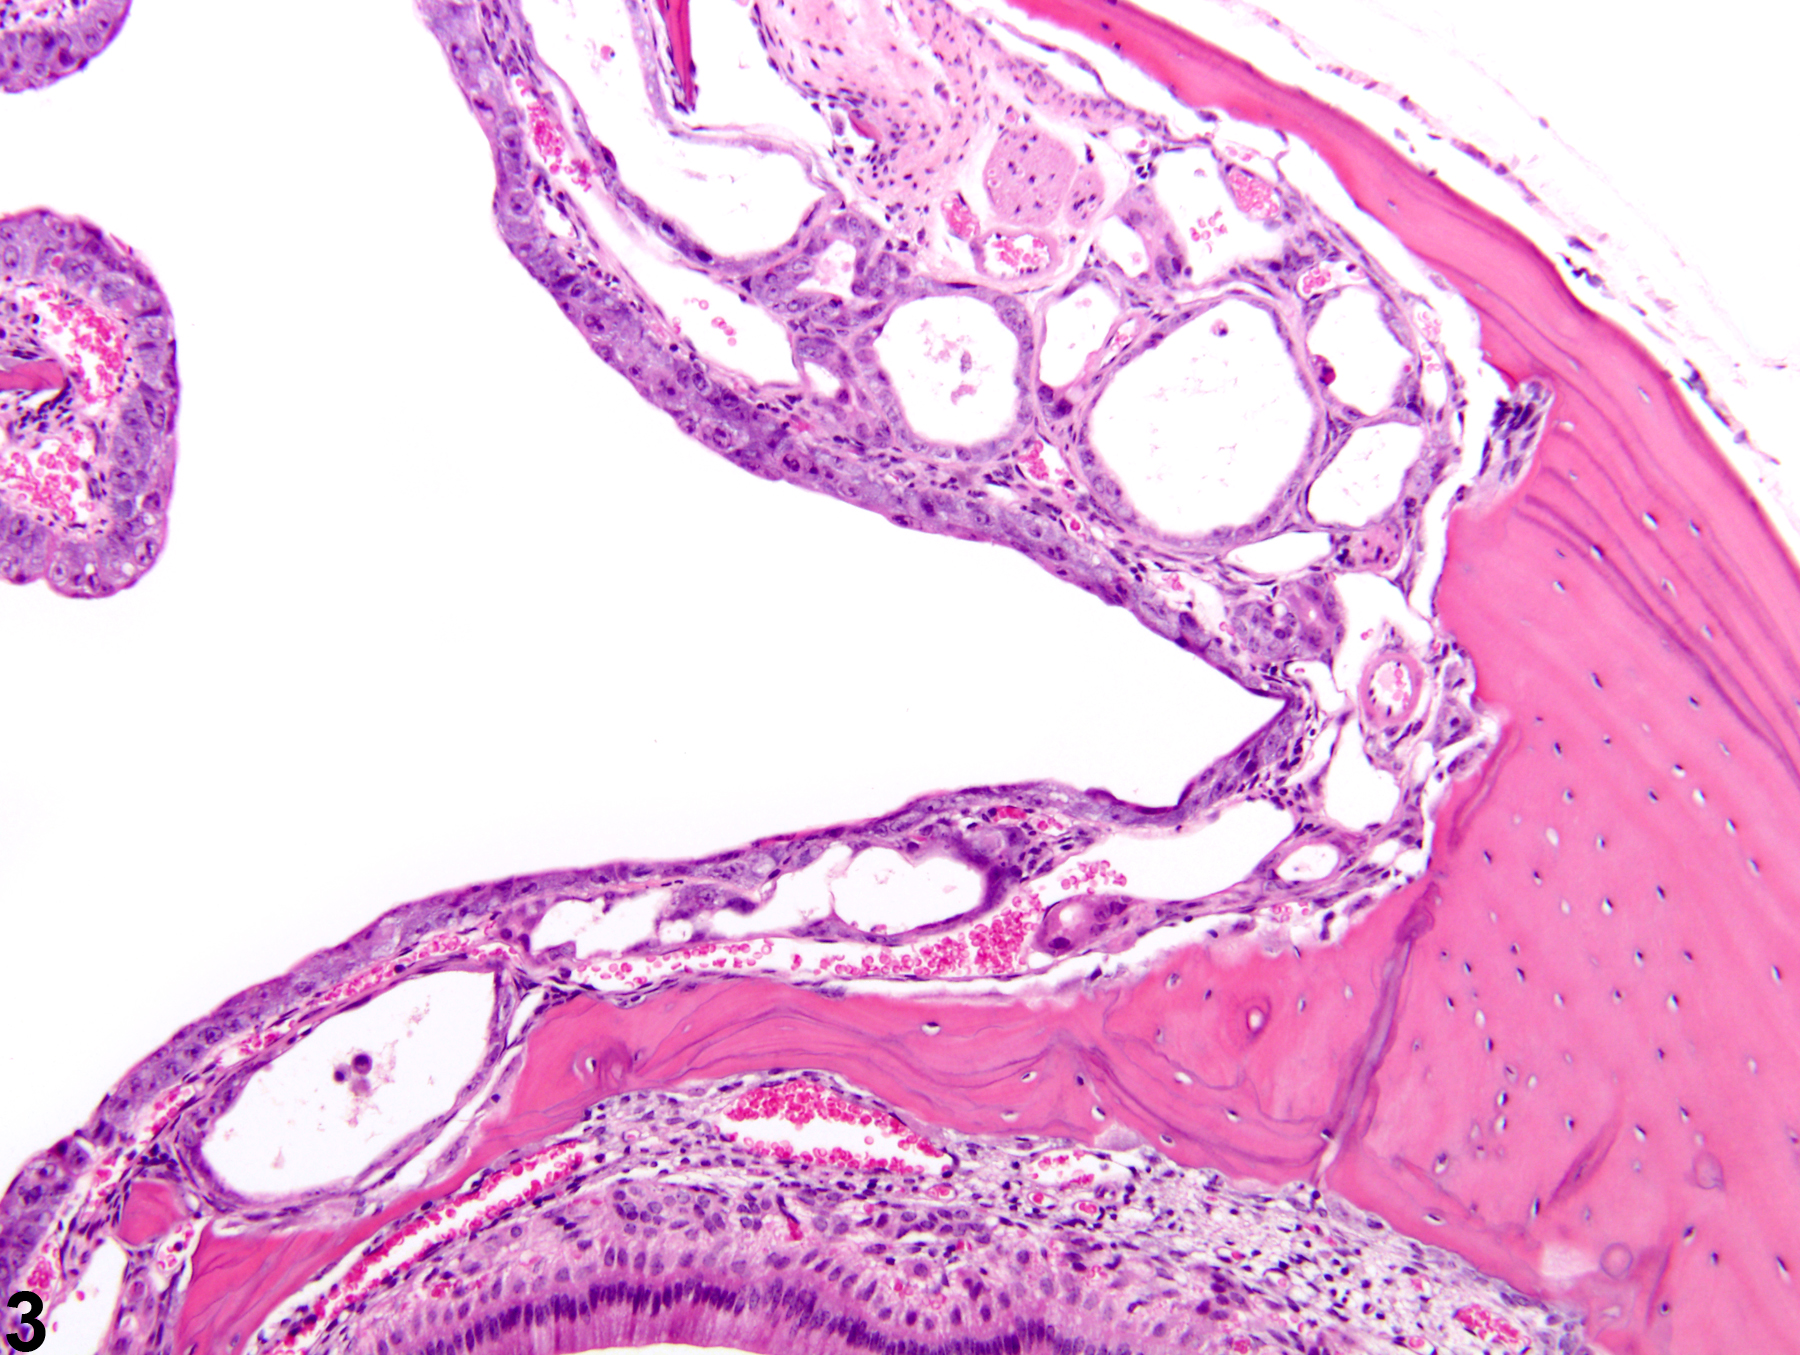 Image of dilation in the nose, respiratory epithelium, glands from a female B6C3F1/N mouse in a chronic study